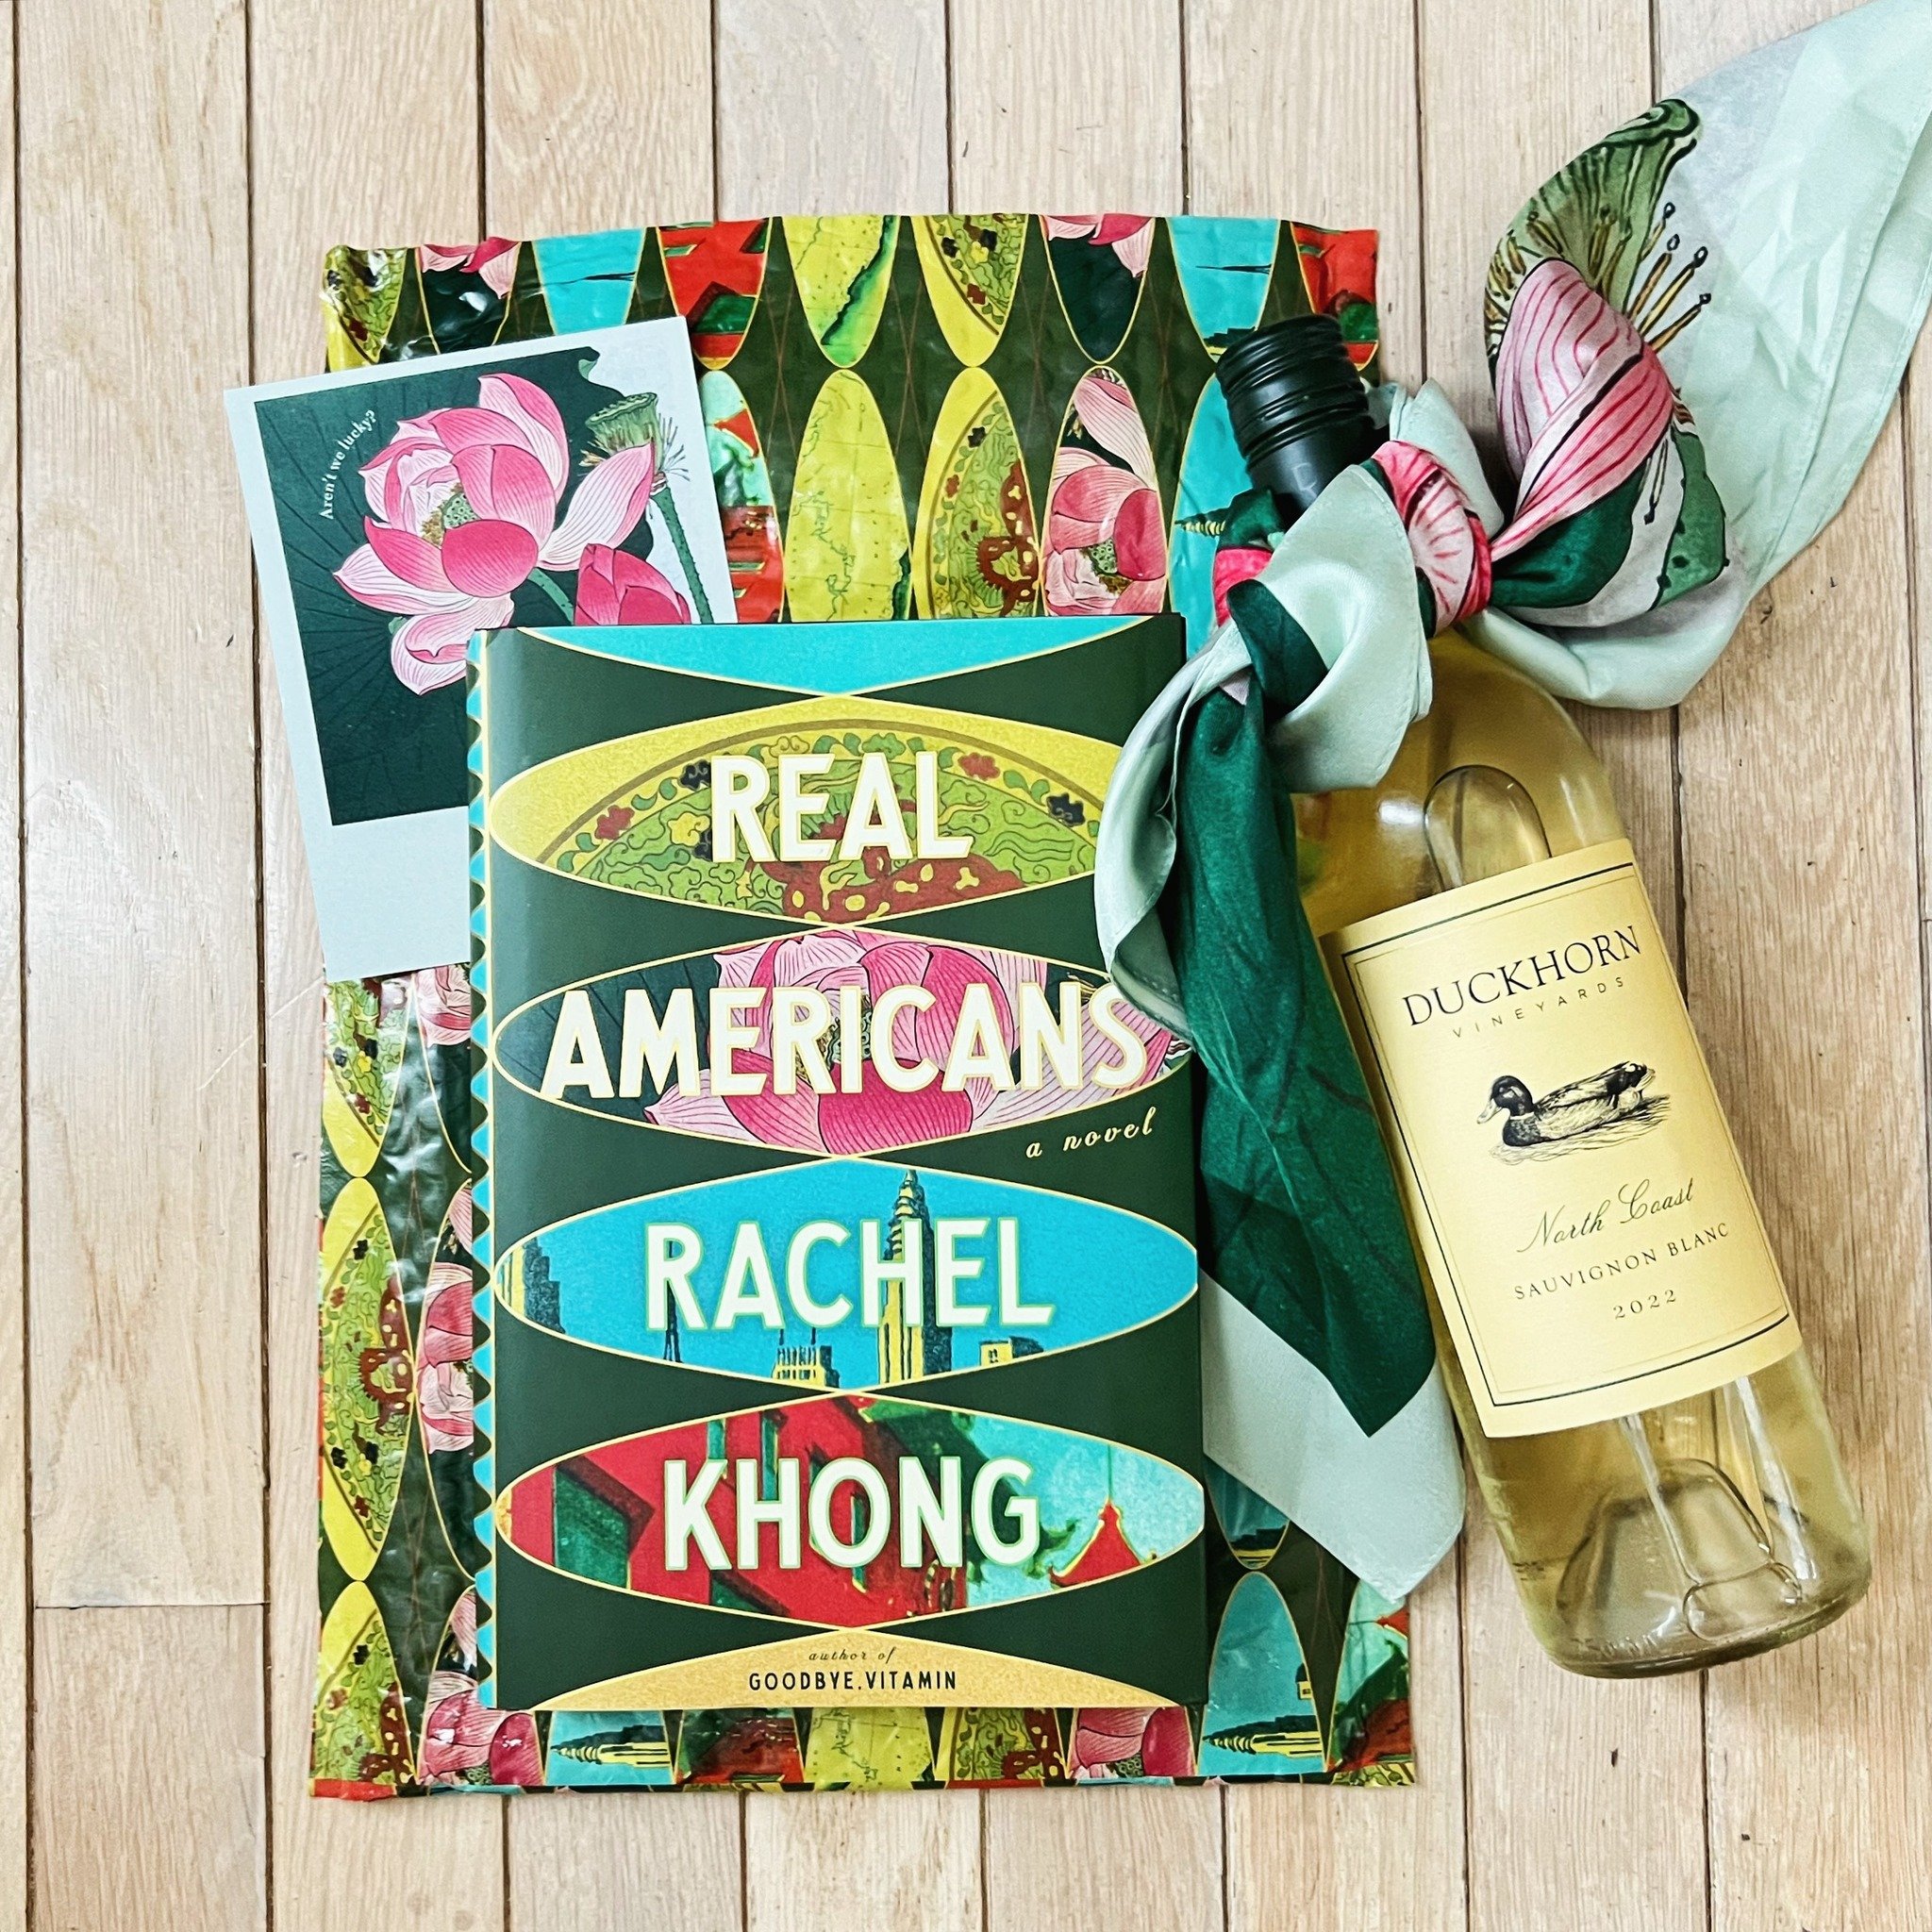 REAL AMERICANS by @rrrrrrrachelkhong is out in the world today! 🥳 Thank you @aaknopf for this lovely #bookmail. I was super excited that the postcard had a QR code with a gifted @prhaudio audiobook via @librofm. As an audiobook lover, I really like 